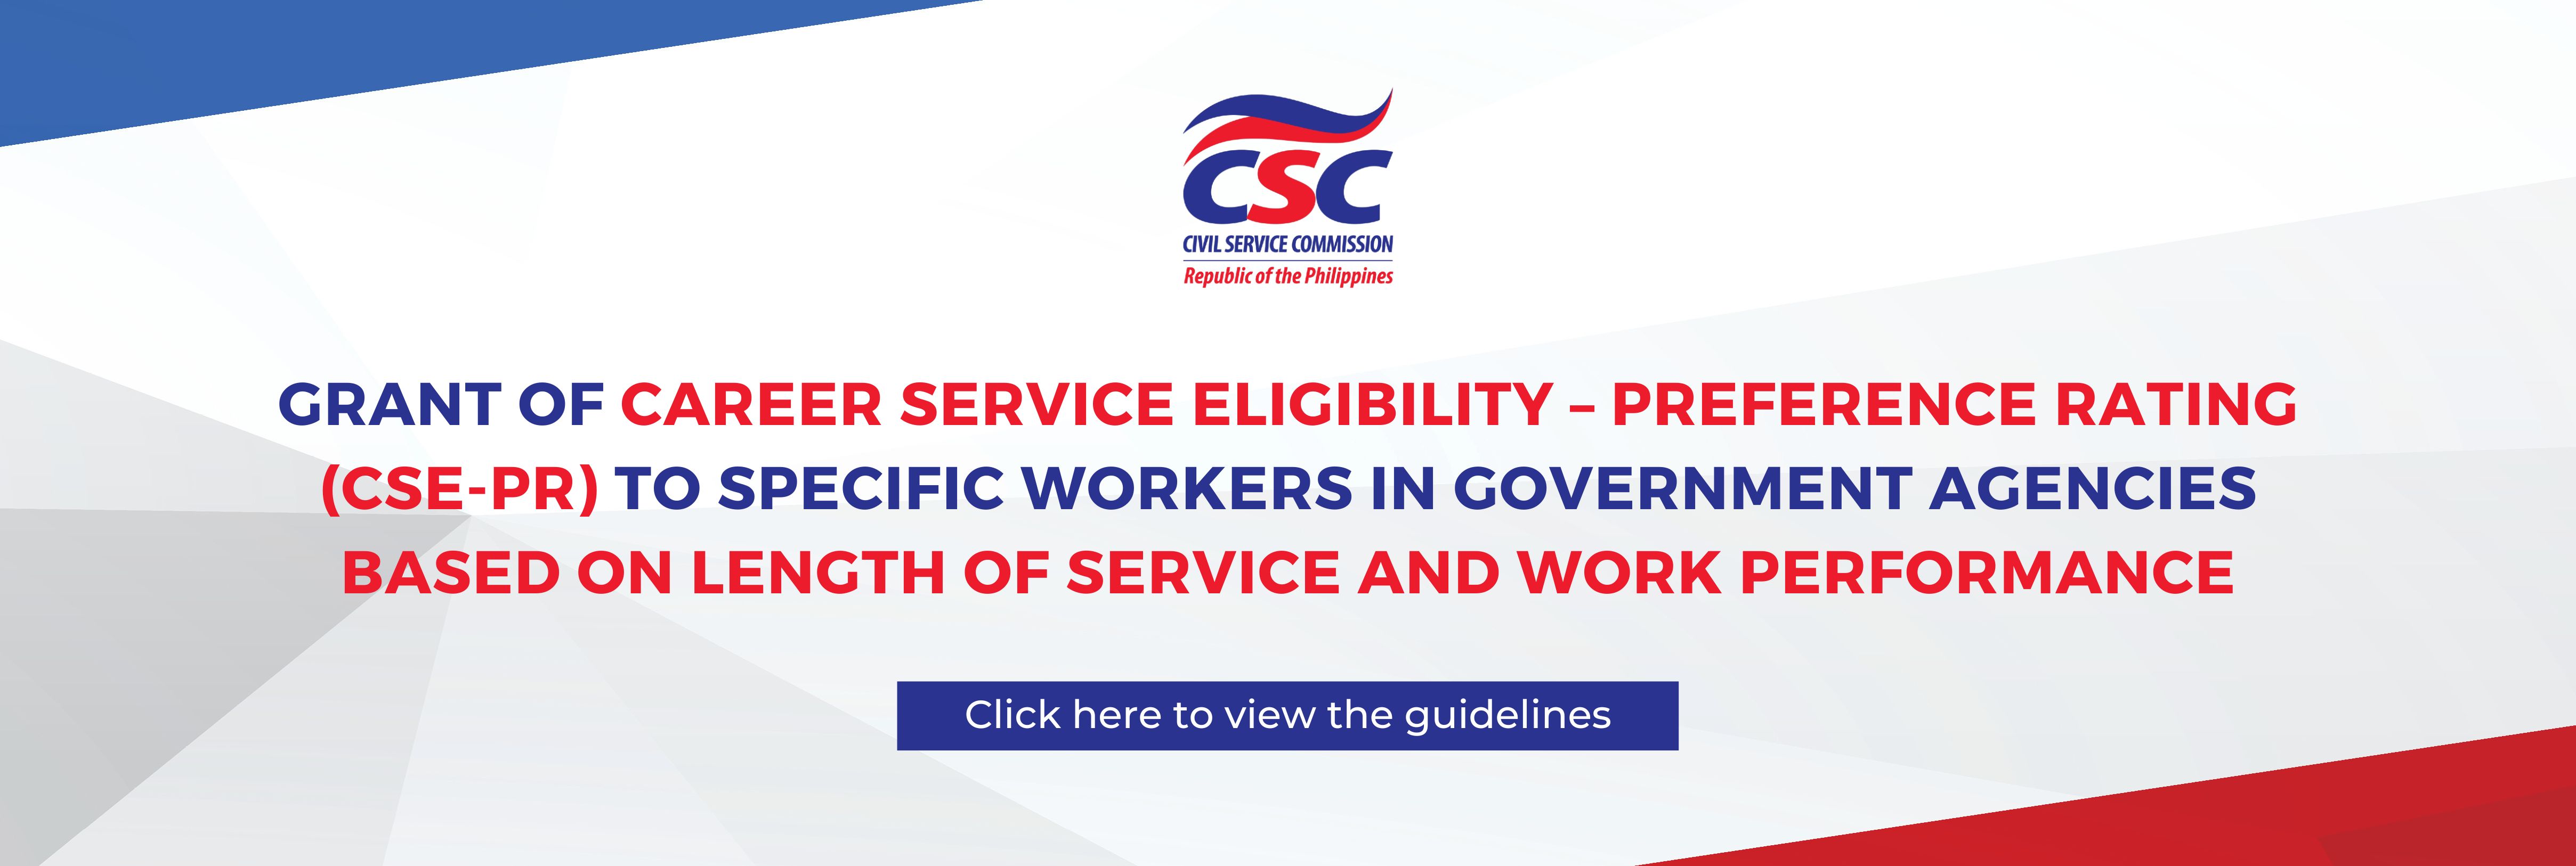 CSC Resolution No. 2301123 - Grant of Career Service Eligibility - Preference Rating (CSE-PR)